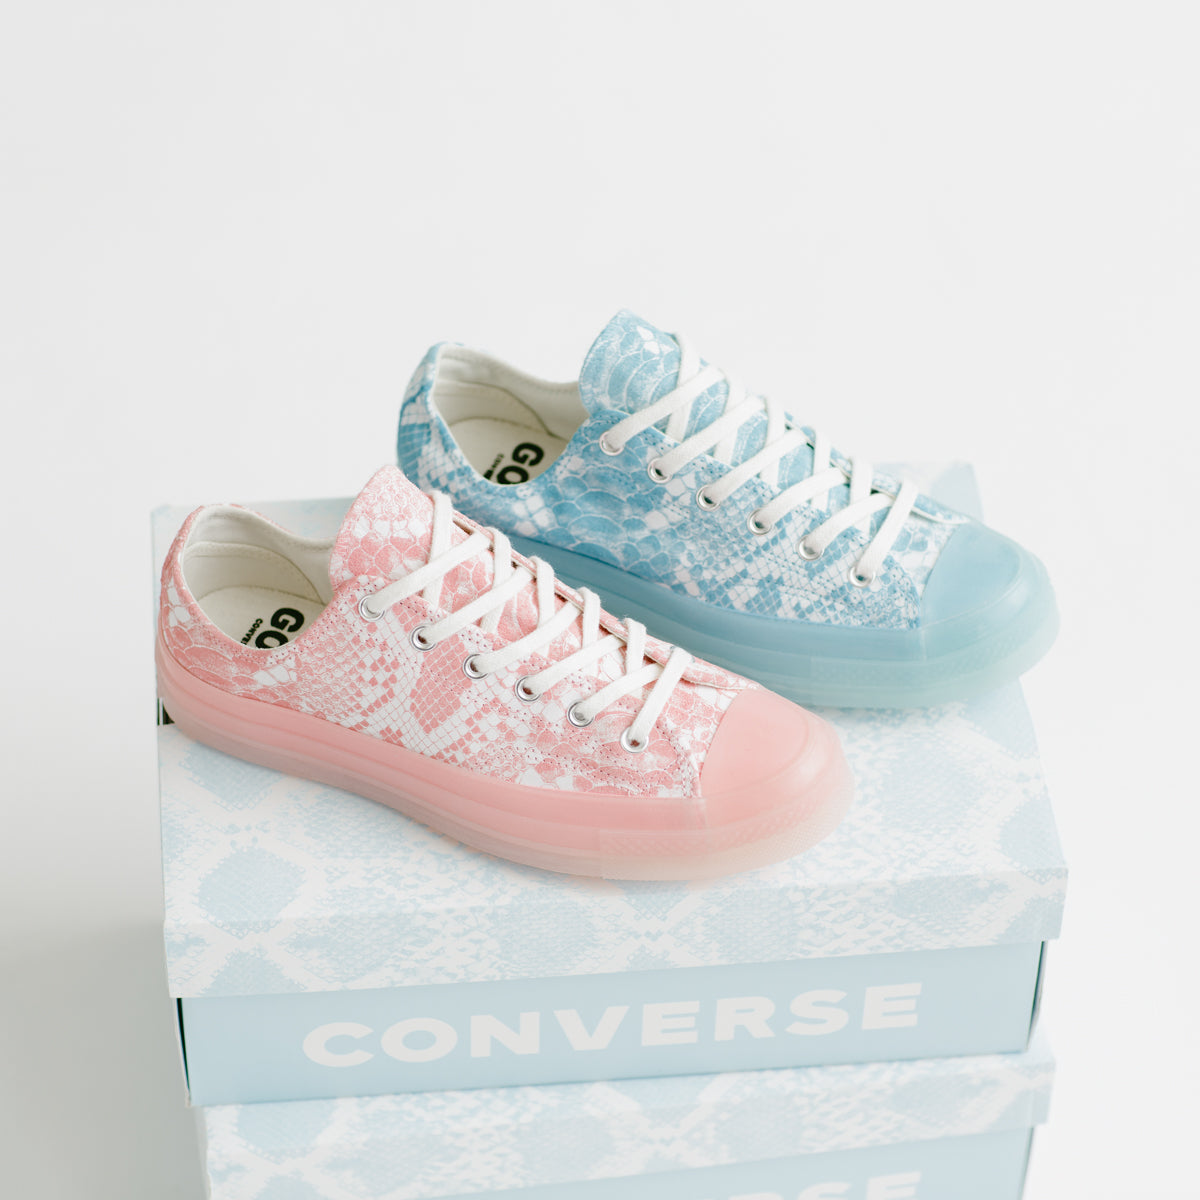 Converse launches its shoe collaboration with Tyler the Creator